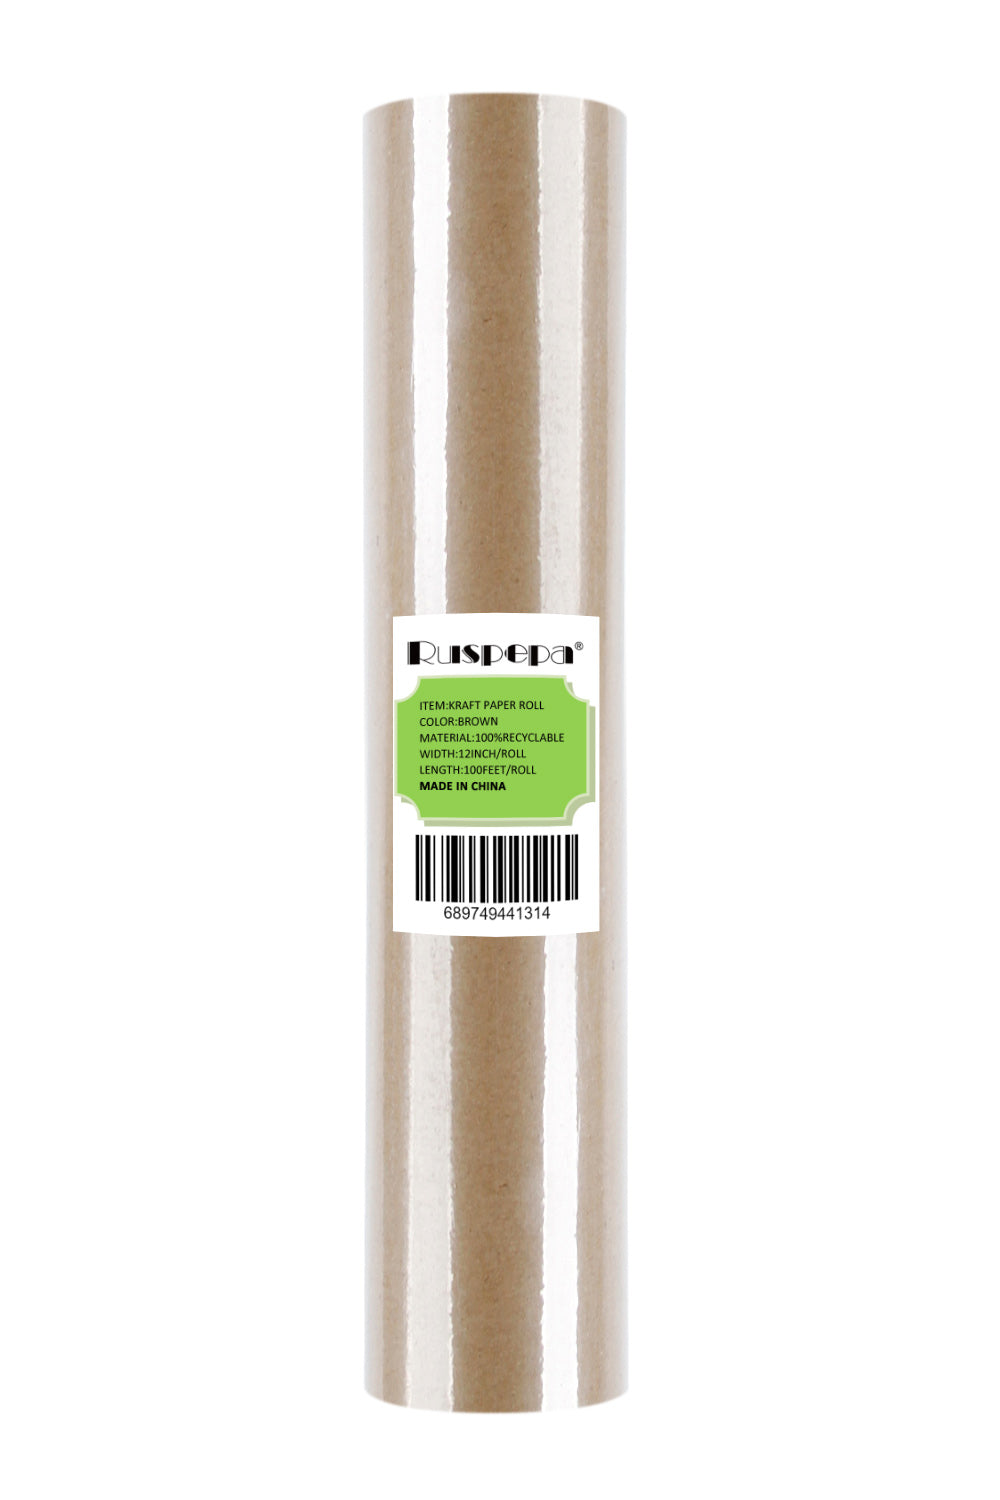 Juvale Kraft Paper Roll 12 X 1200 In, Brown Shipping Paper For